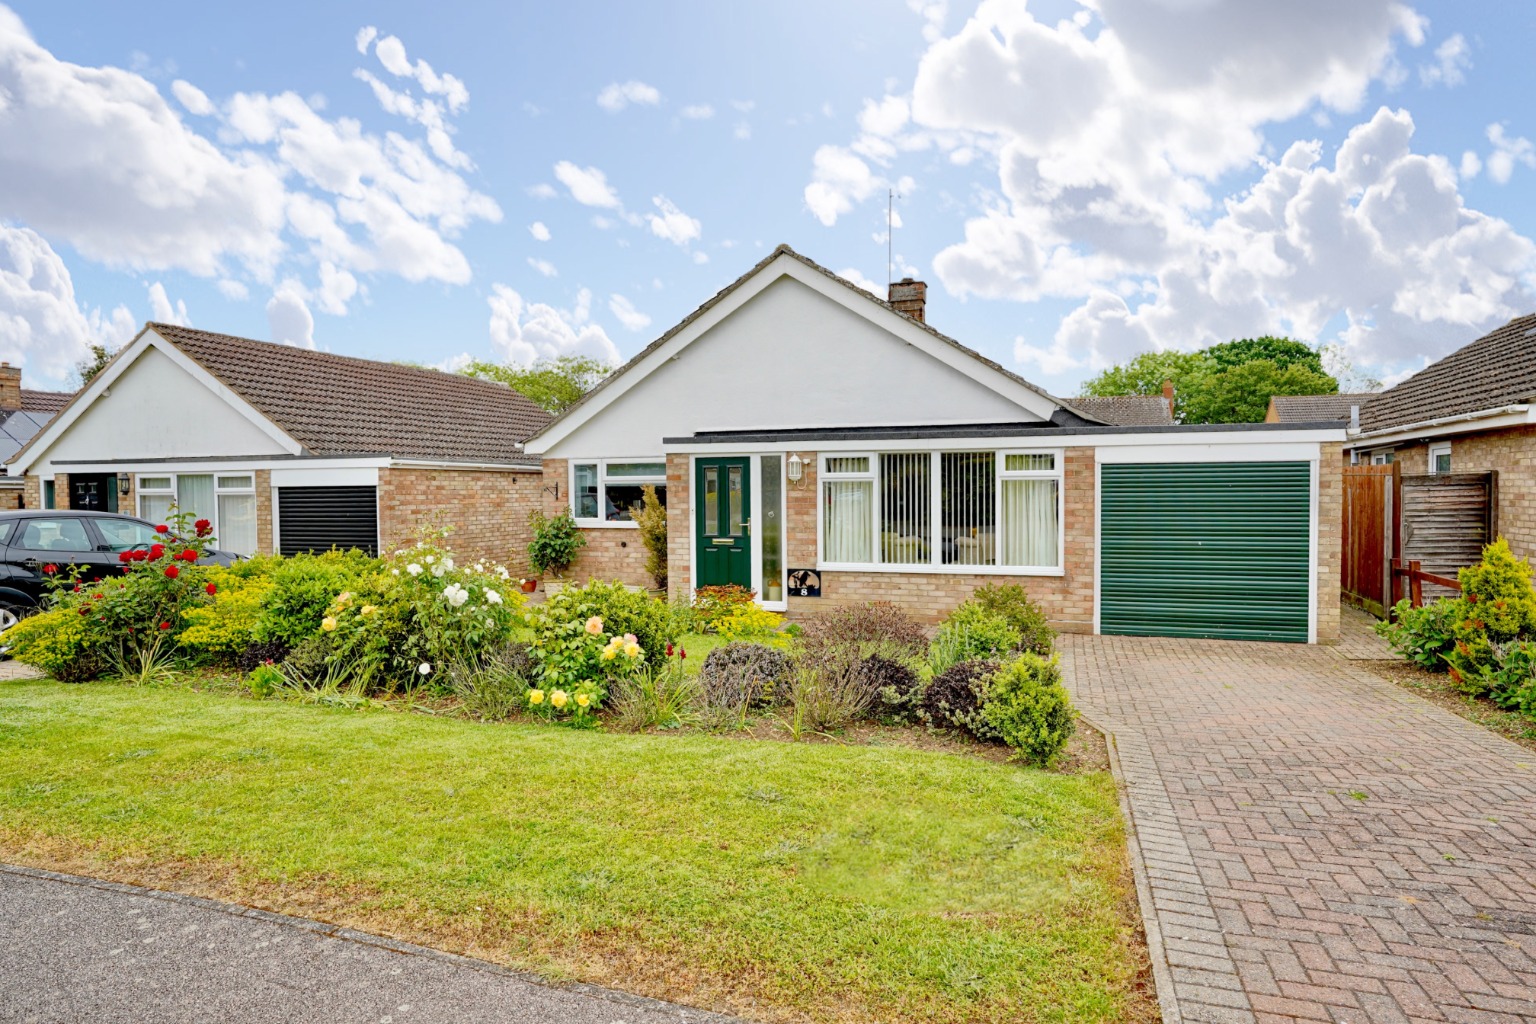 3 bed detached bungalow for sale in Ashton Close, St Ives - Property Image 1